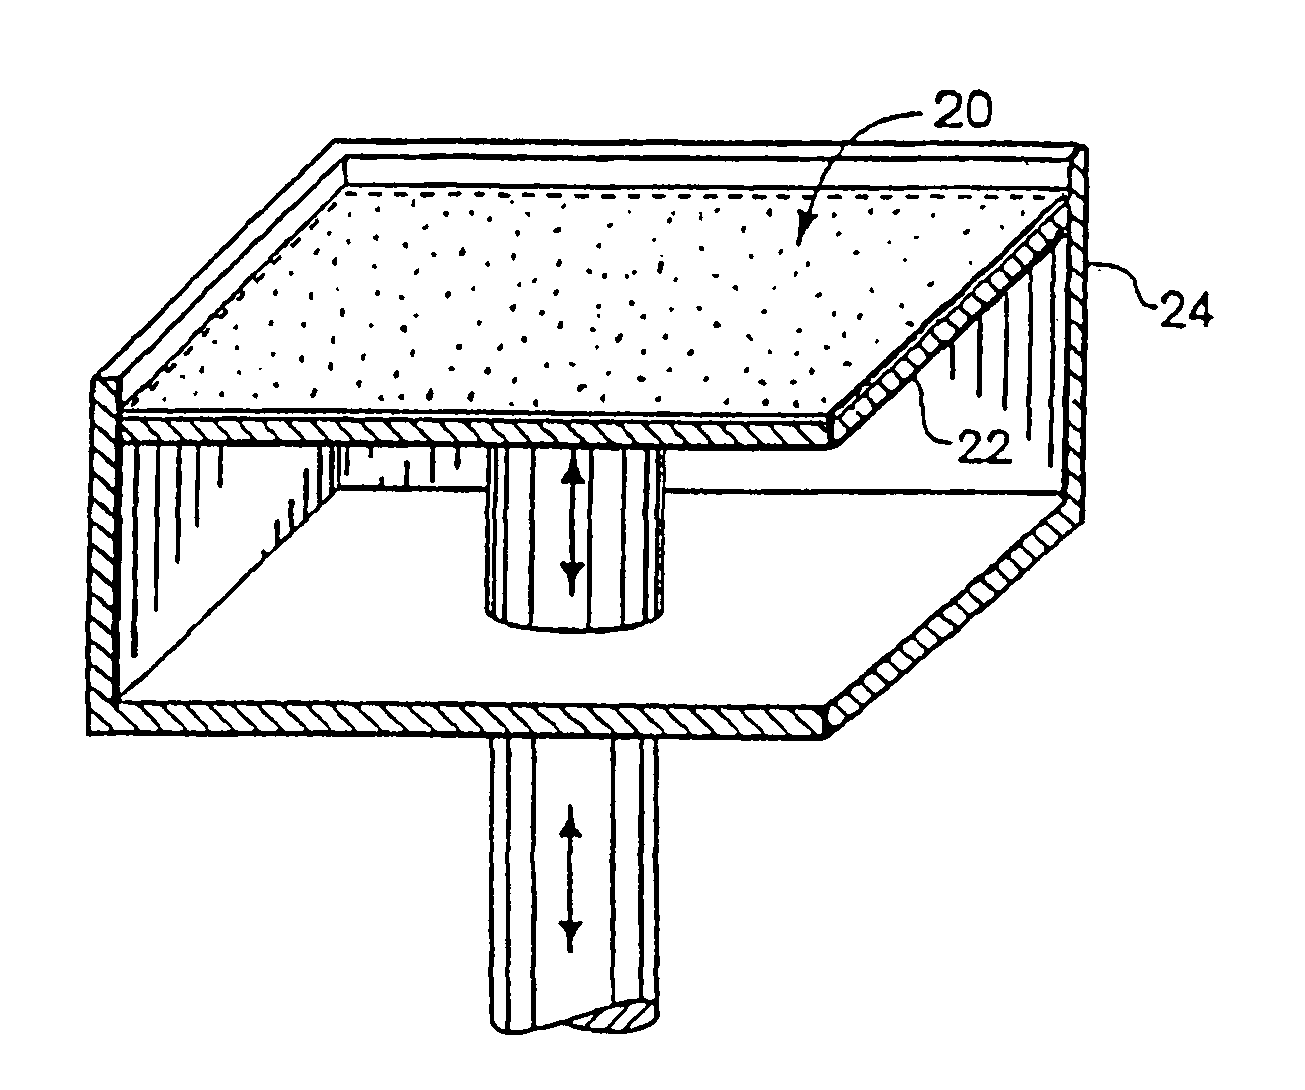 Material systems and methods of three-dimensional printing